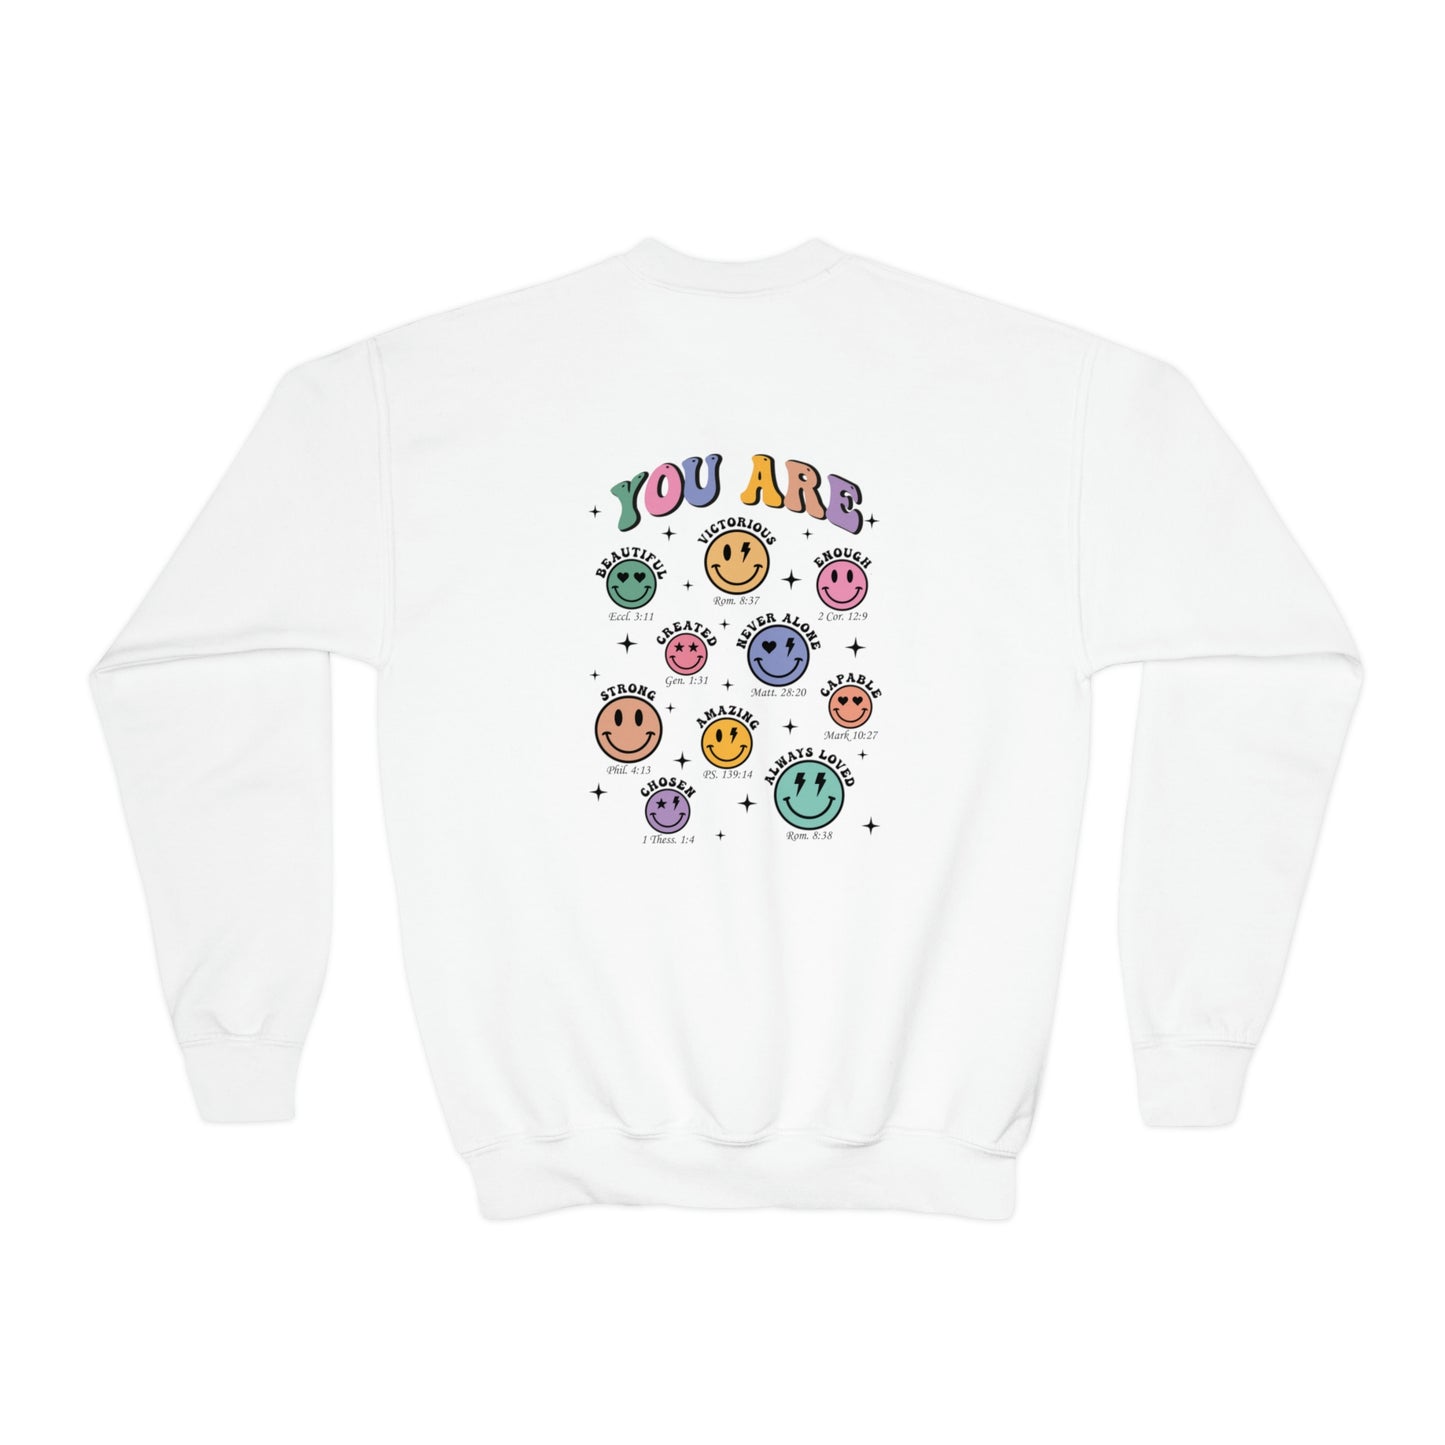 You Are - Youth Sweatshirt